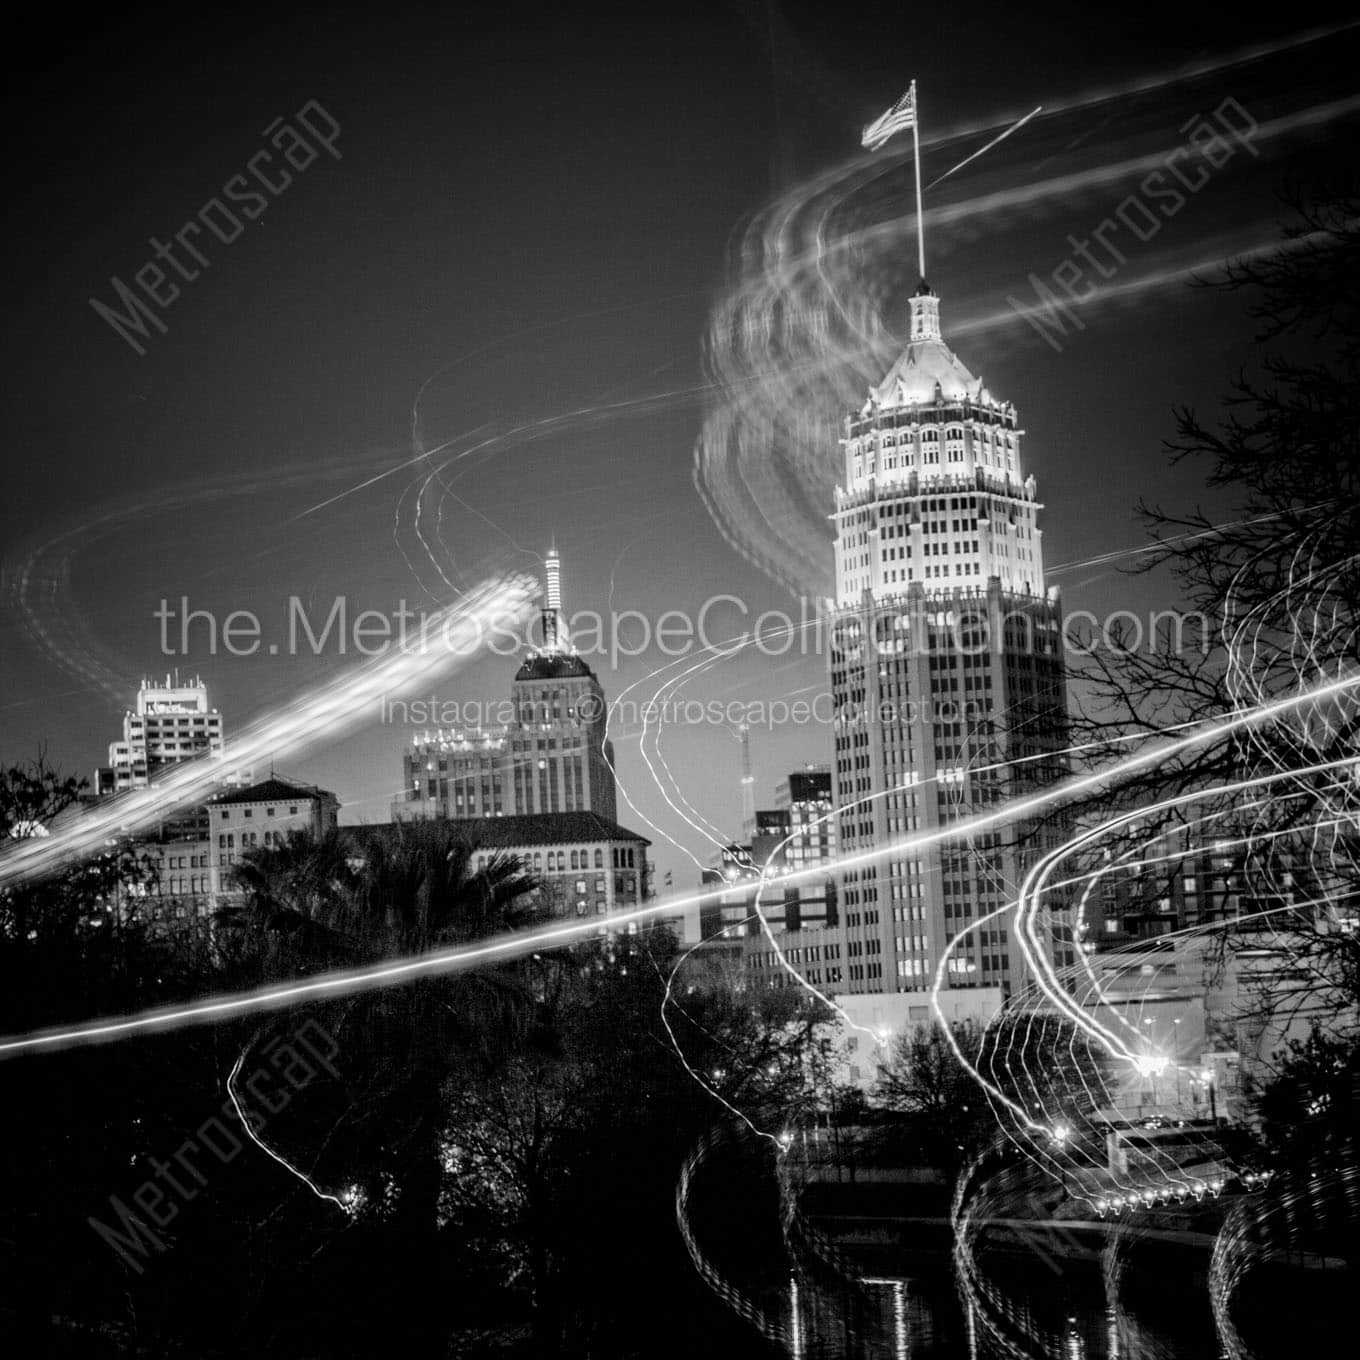 tower life building at night Black & White Wall Art